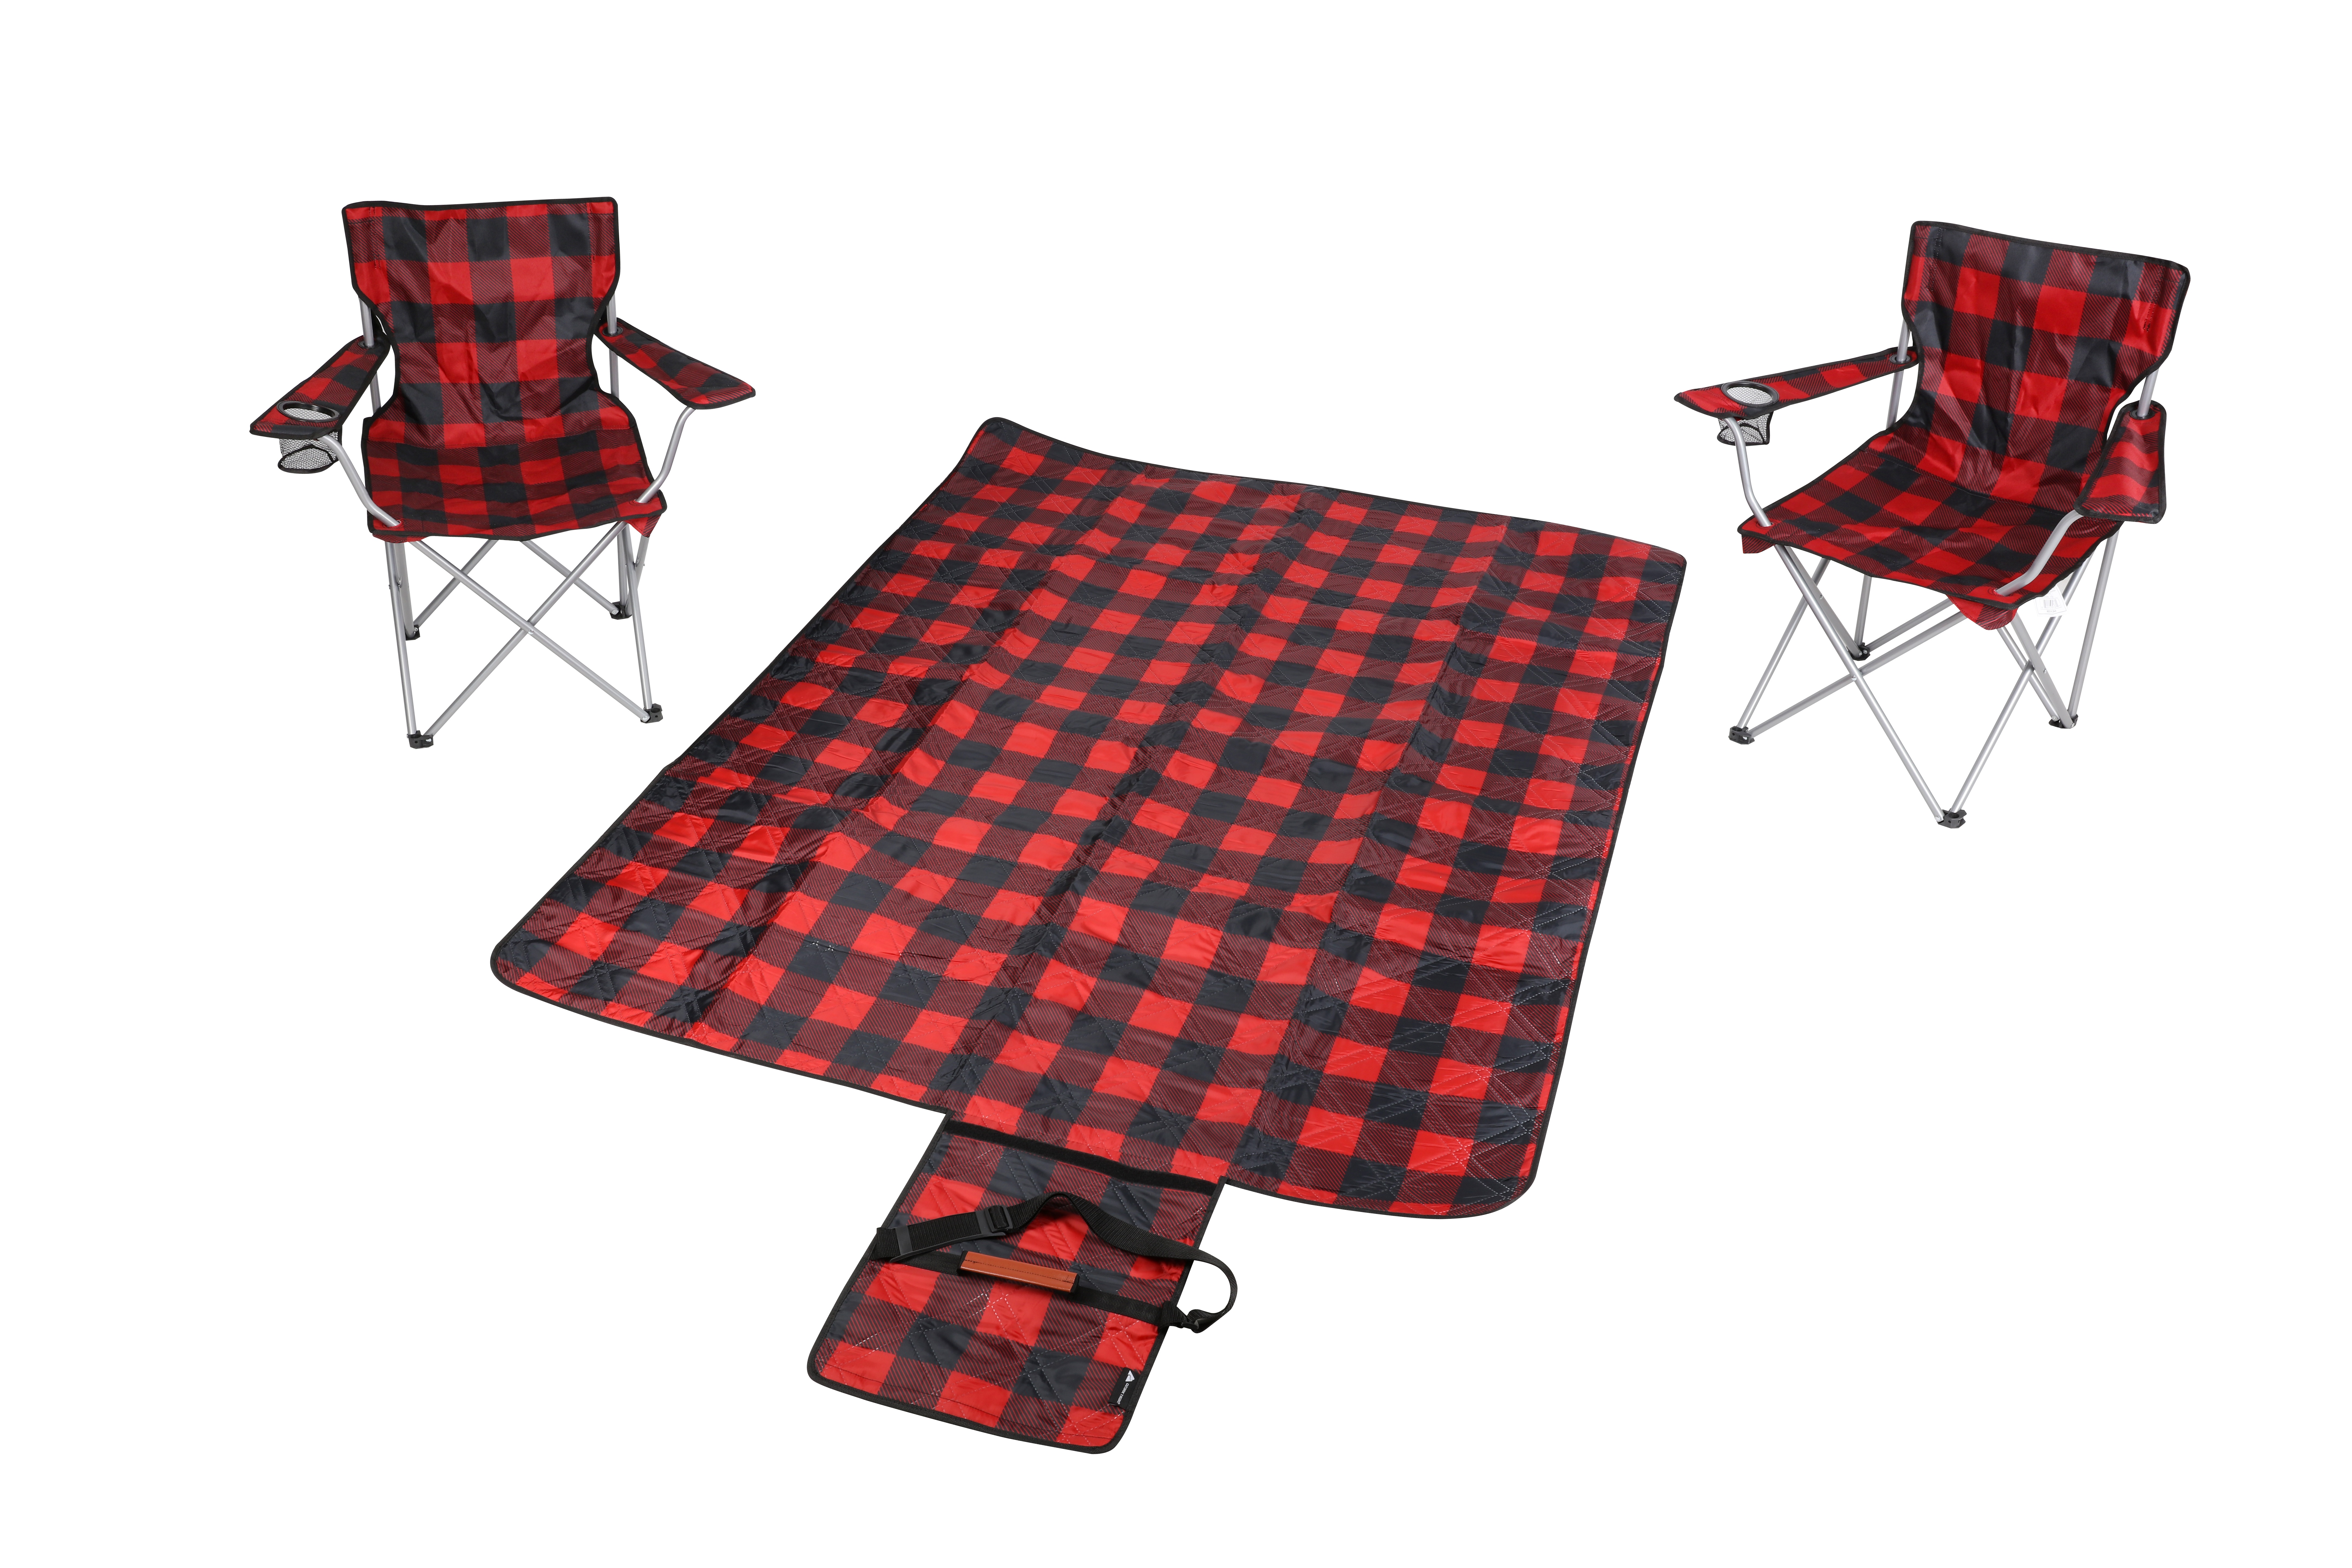 Ozark Trail 3 Piece Buffalo Plaid Camping Chairs and Blanket Combo, Red, Adult - image 1 of 6